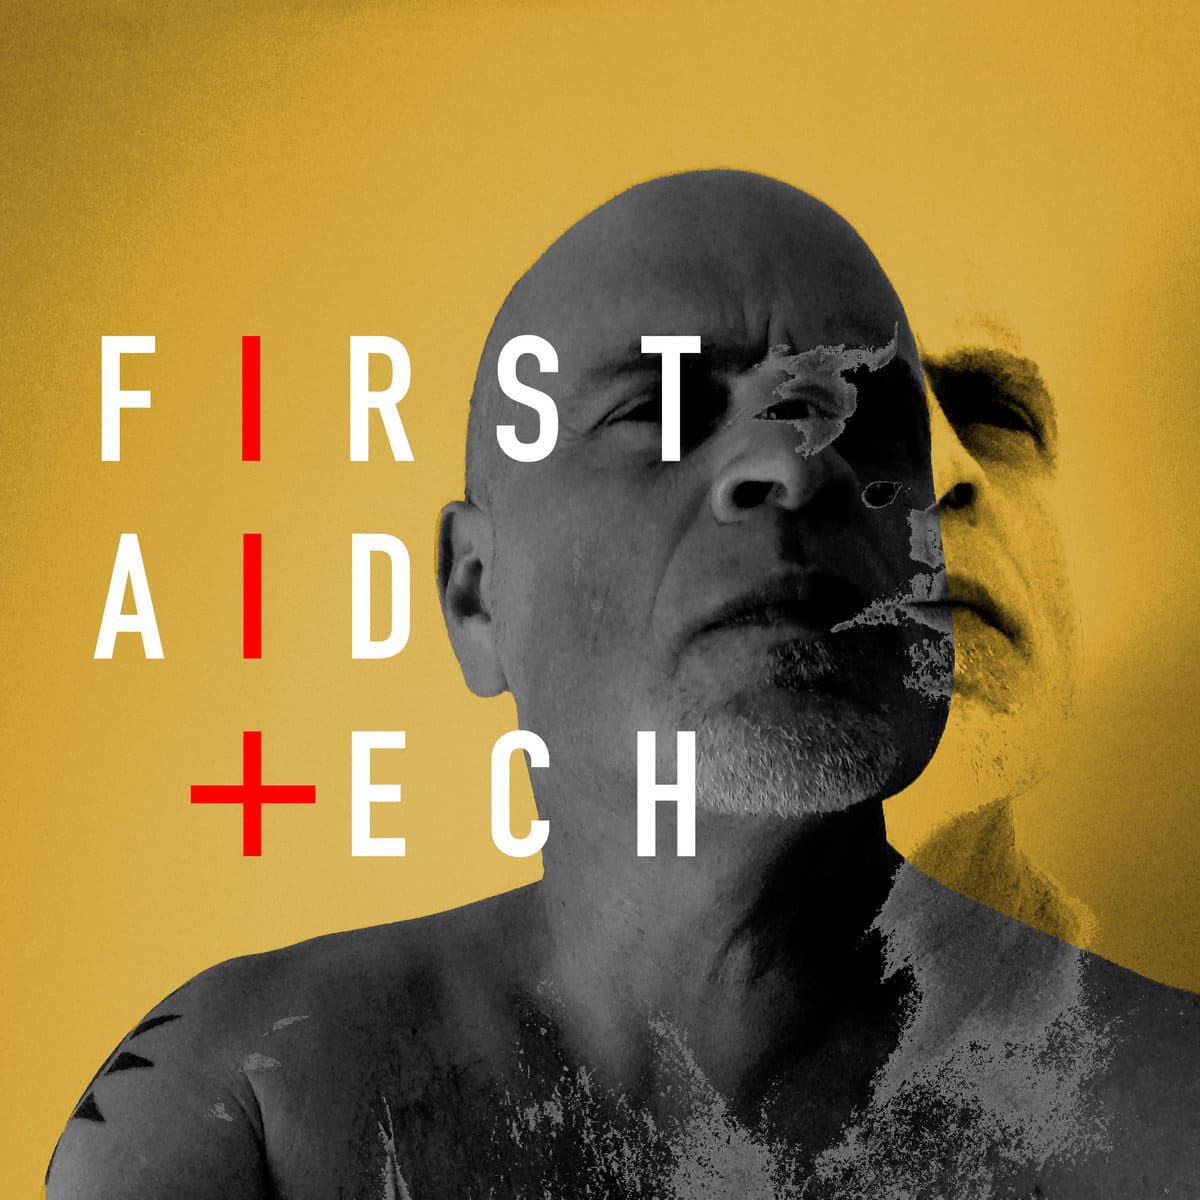 First Aid Tech presents techno body debut EP - Out now